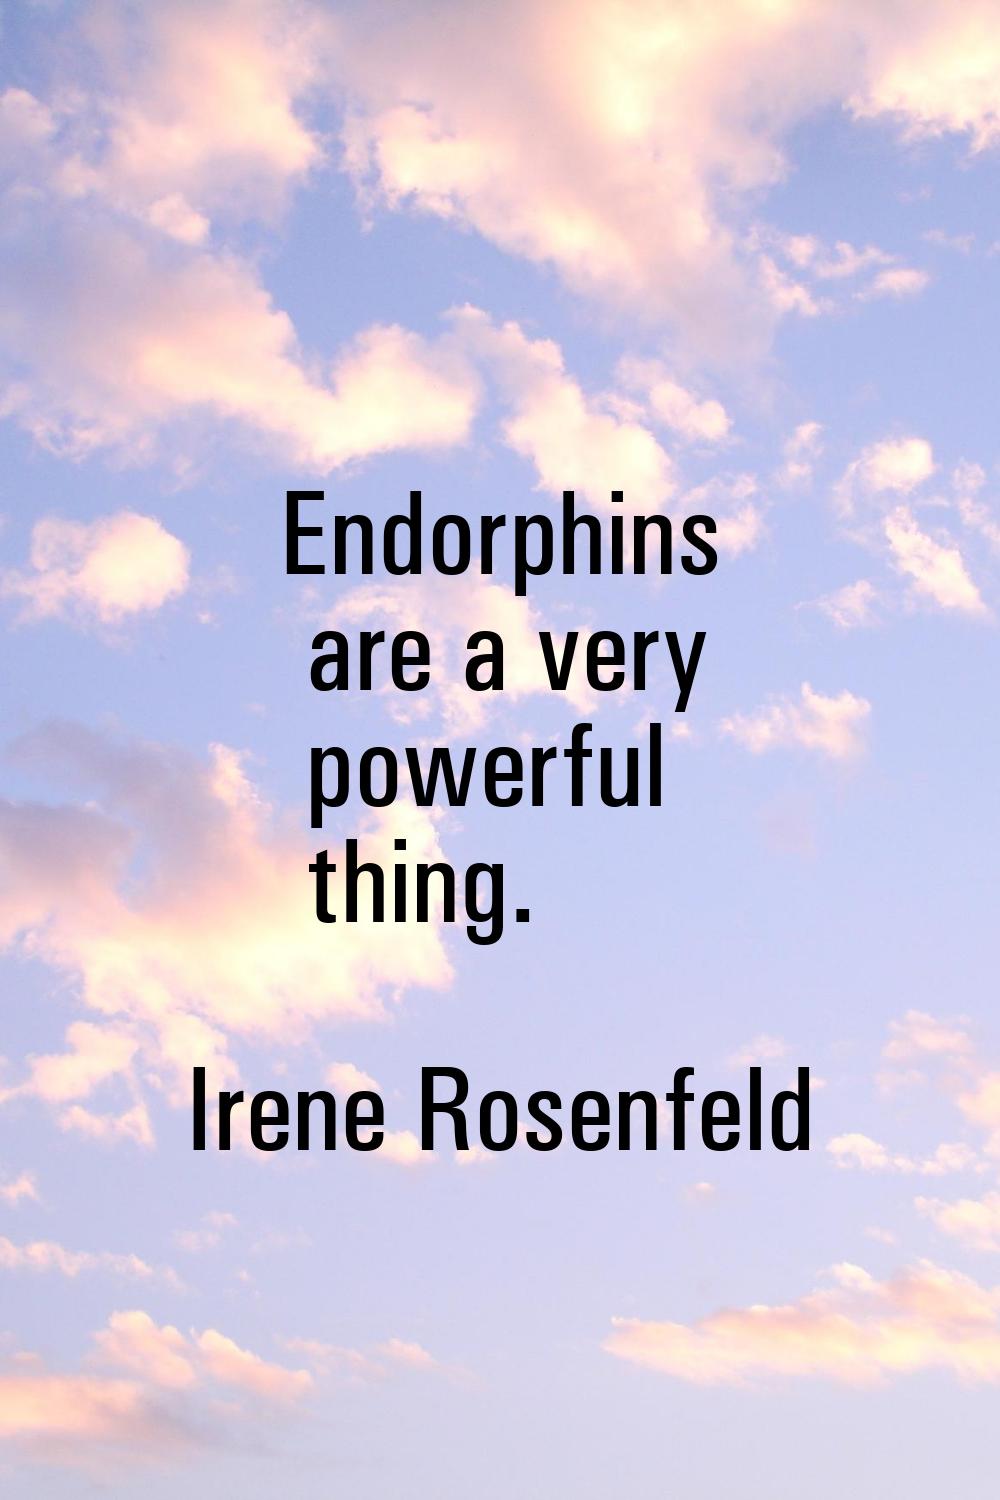 Endorphins are a very powerful thing.